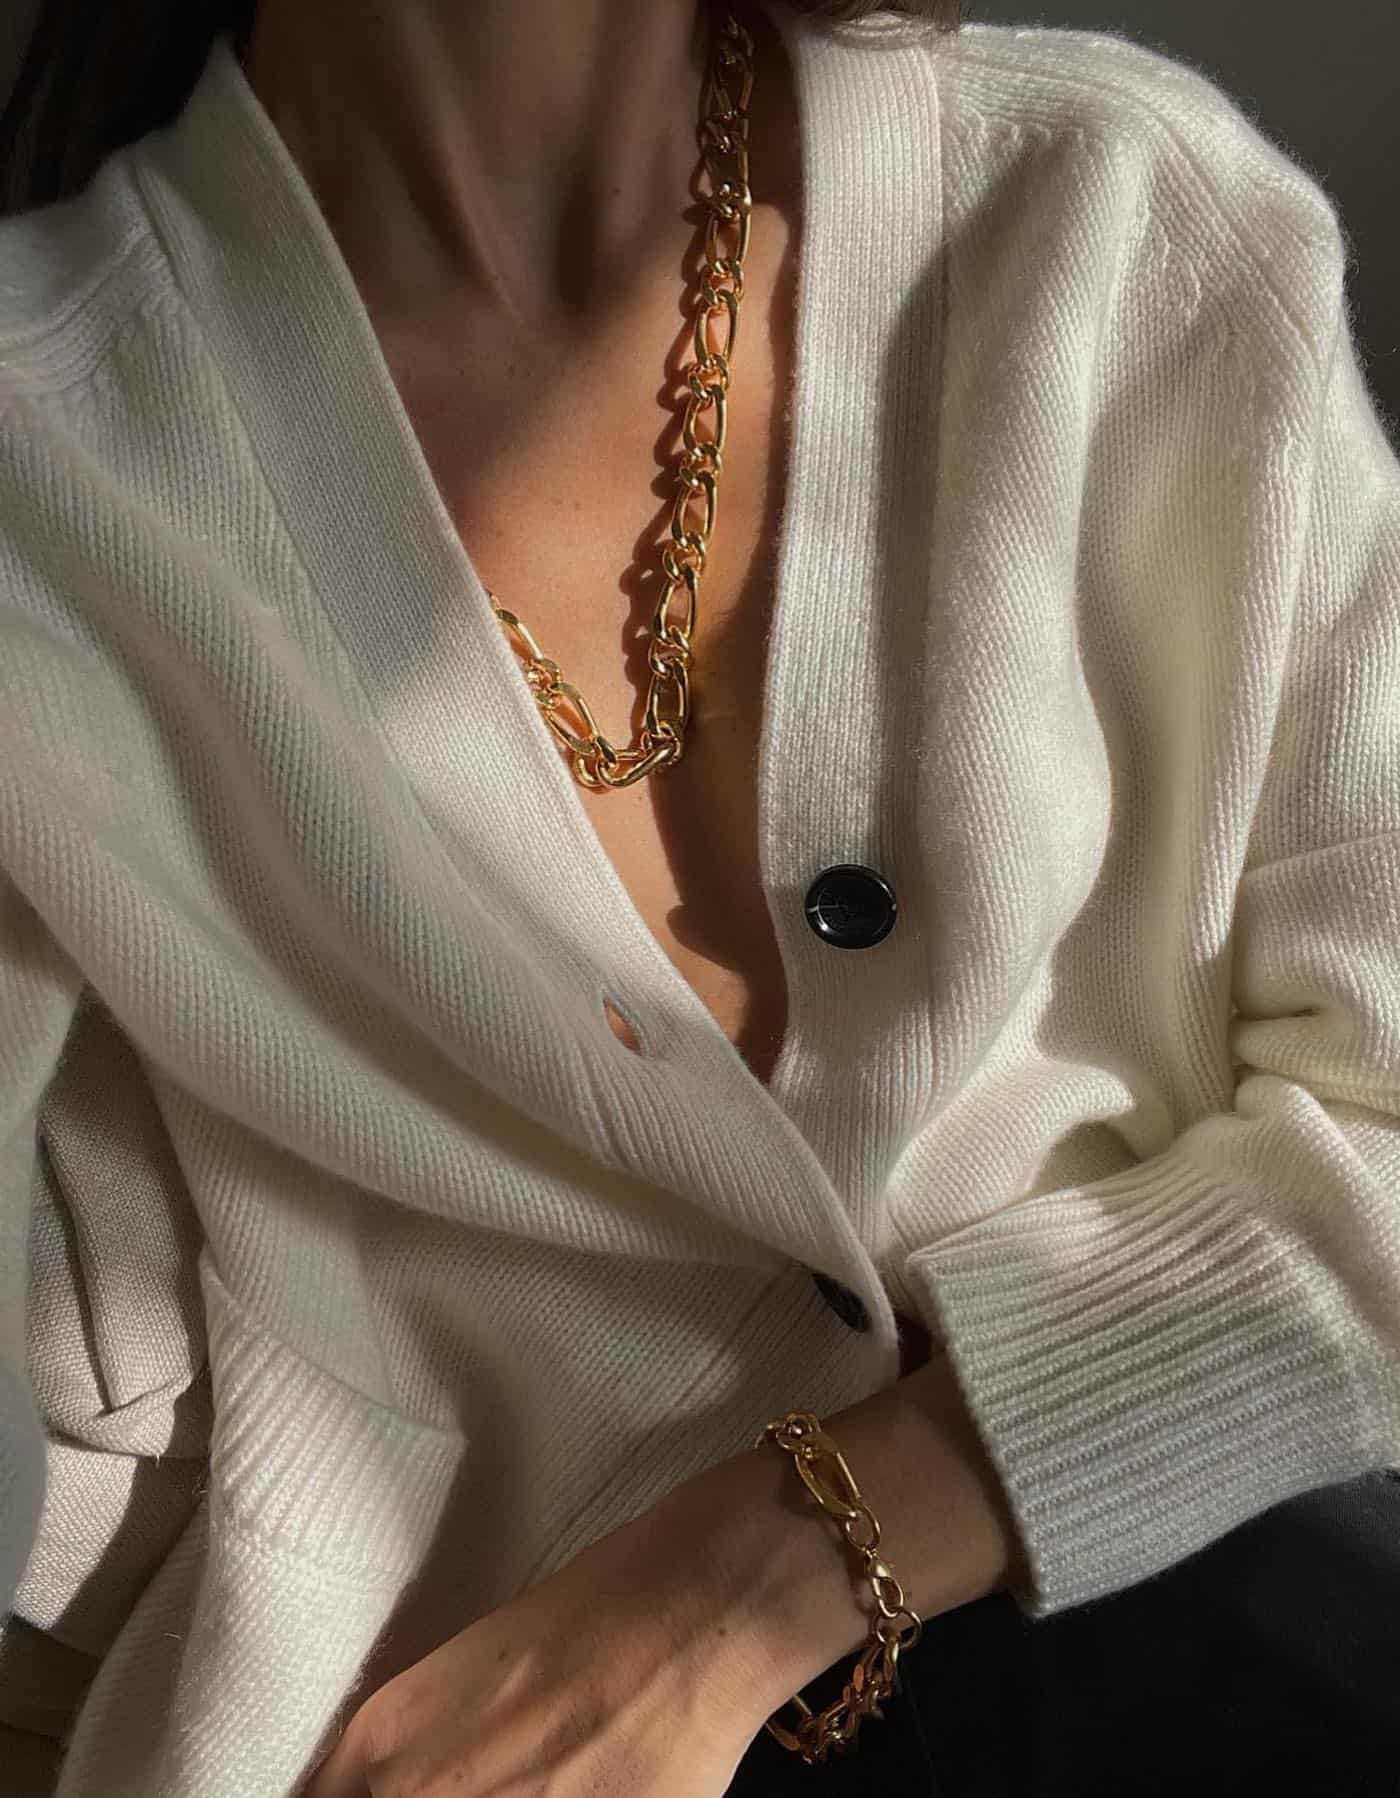 Close up image of a woman wearing a white cardigan with gold jewelry.